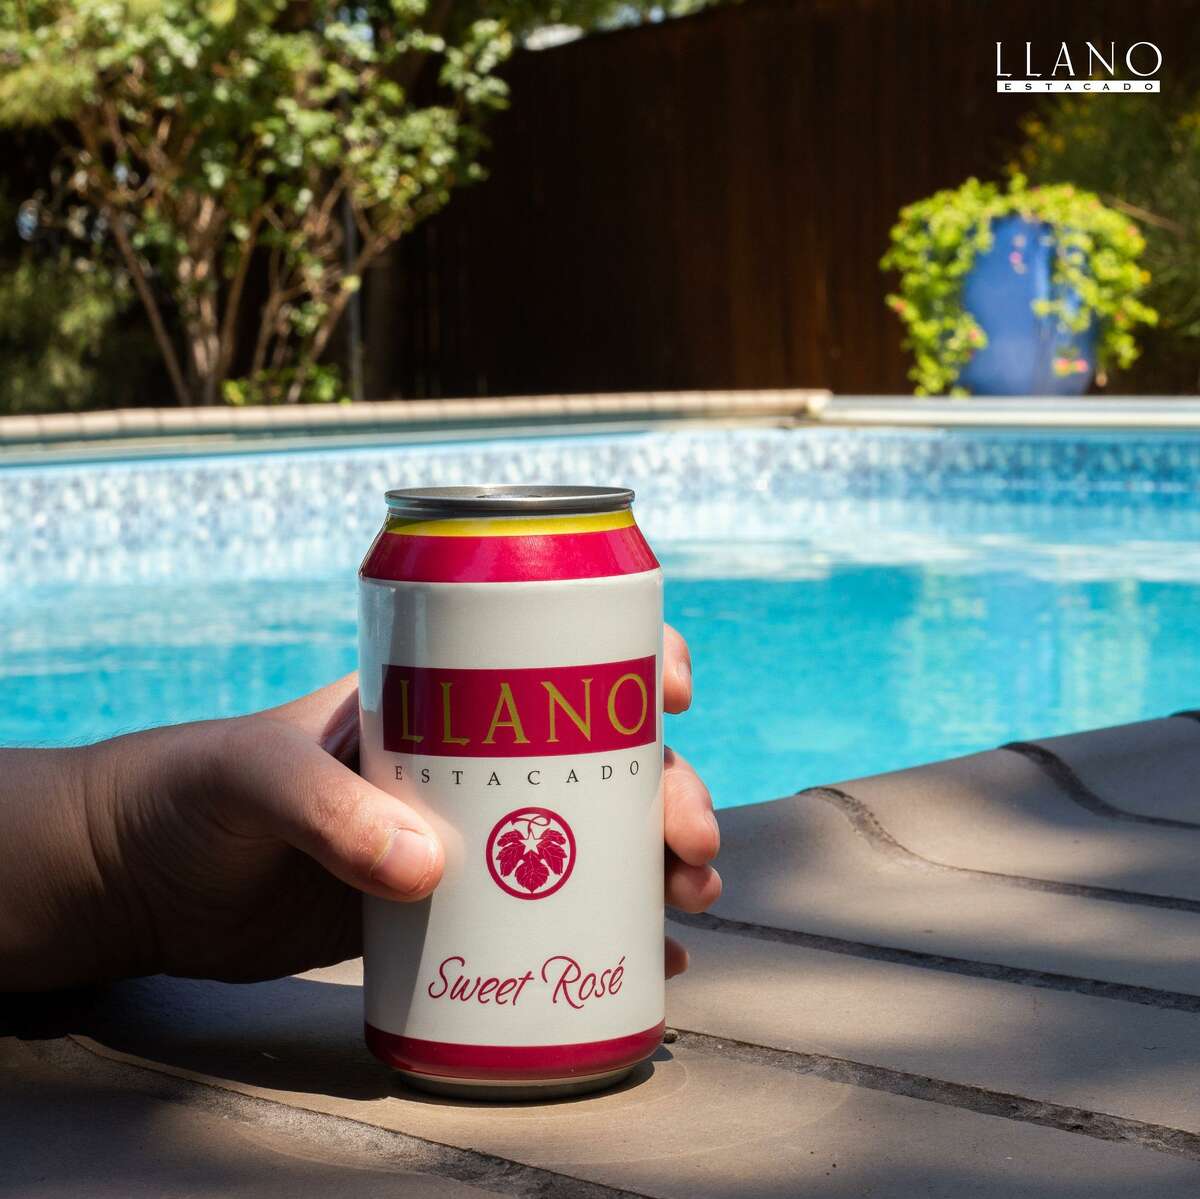 Canned wine in the summer is becoming popular, especially around the pool and around the lake. Several Texas wineries are serving their wines in cans like Llano Estacado and Messina Hof.